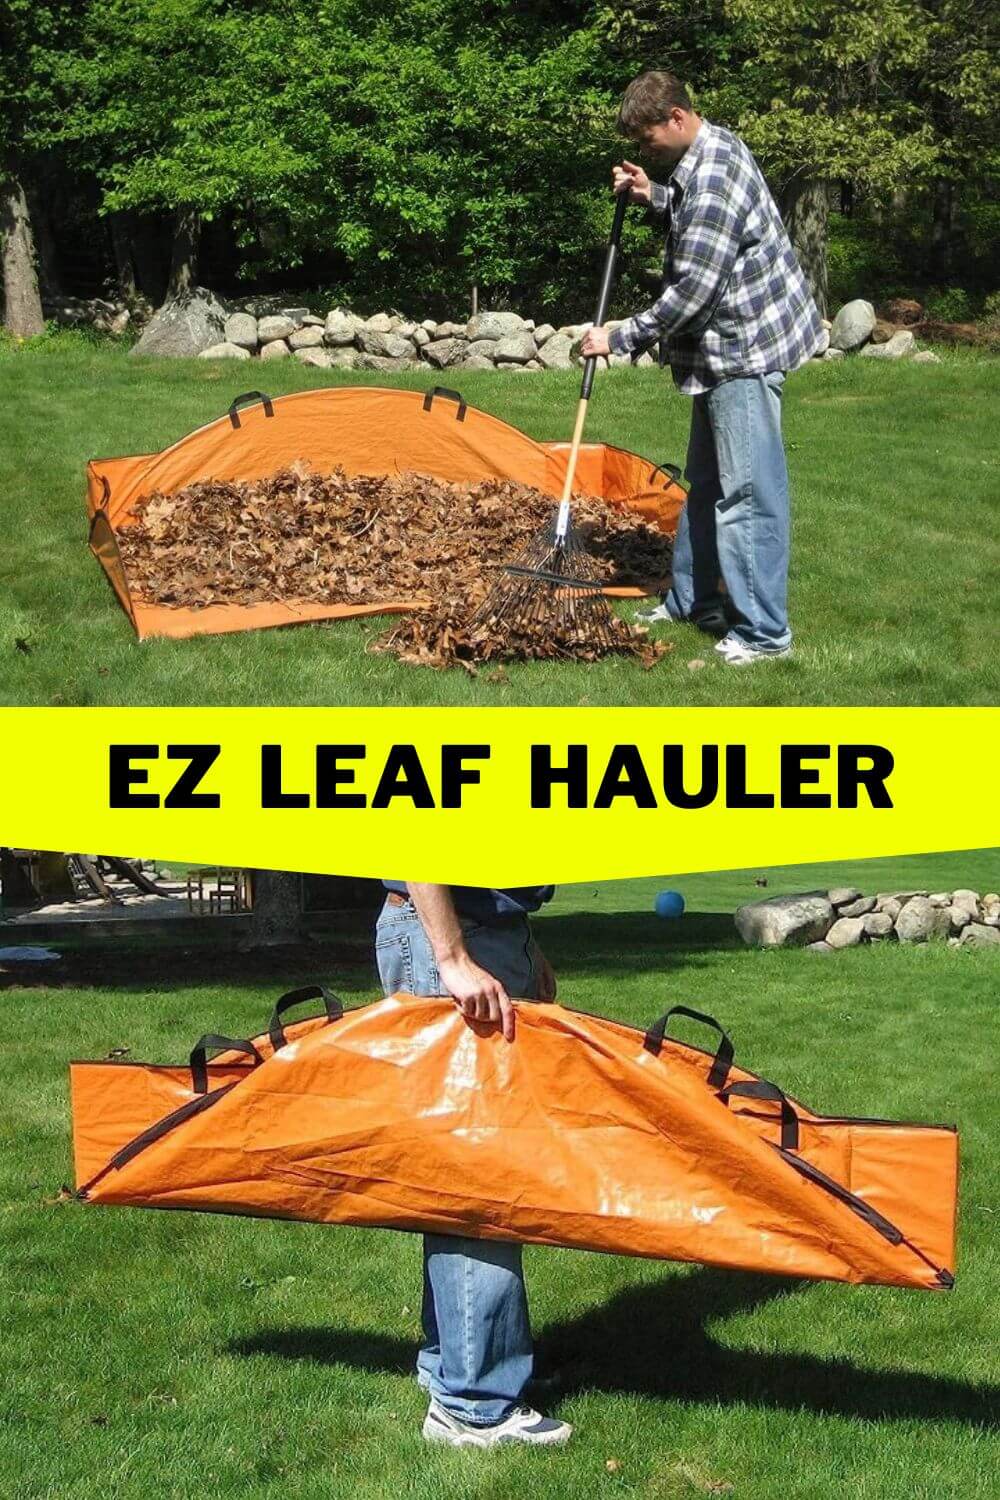 EZ Leaf Hauler is Collapsible and Makes Leaf Cleanup Easy